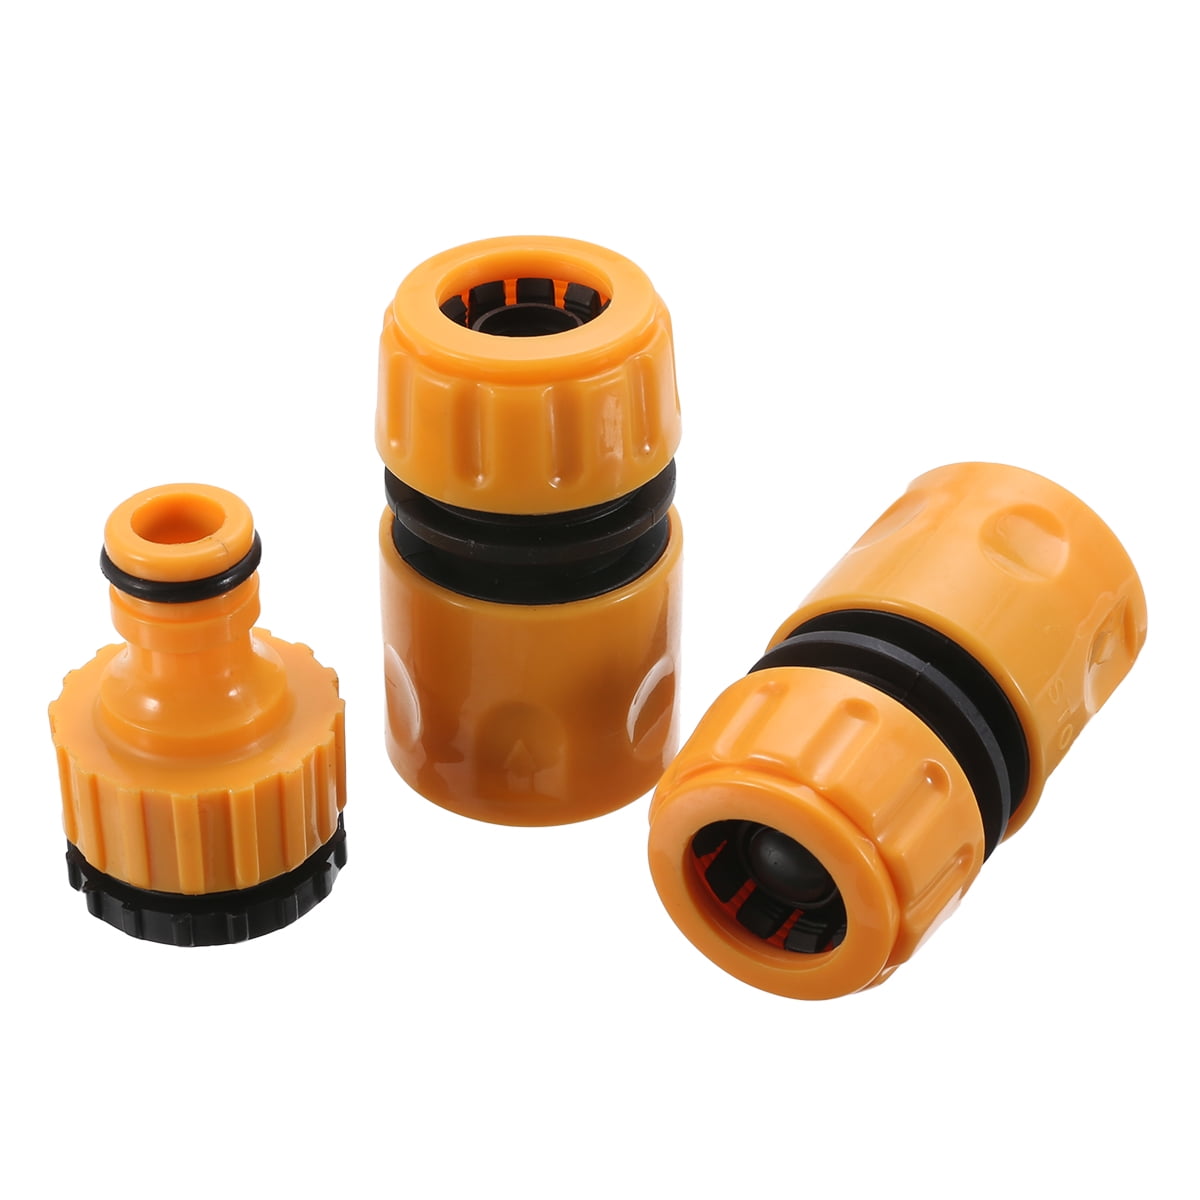 3PC/Set 1/2"3/4" Garden Hose Water Pipe Quick Connector Tube Fitting Tap Adapter 